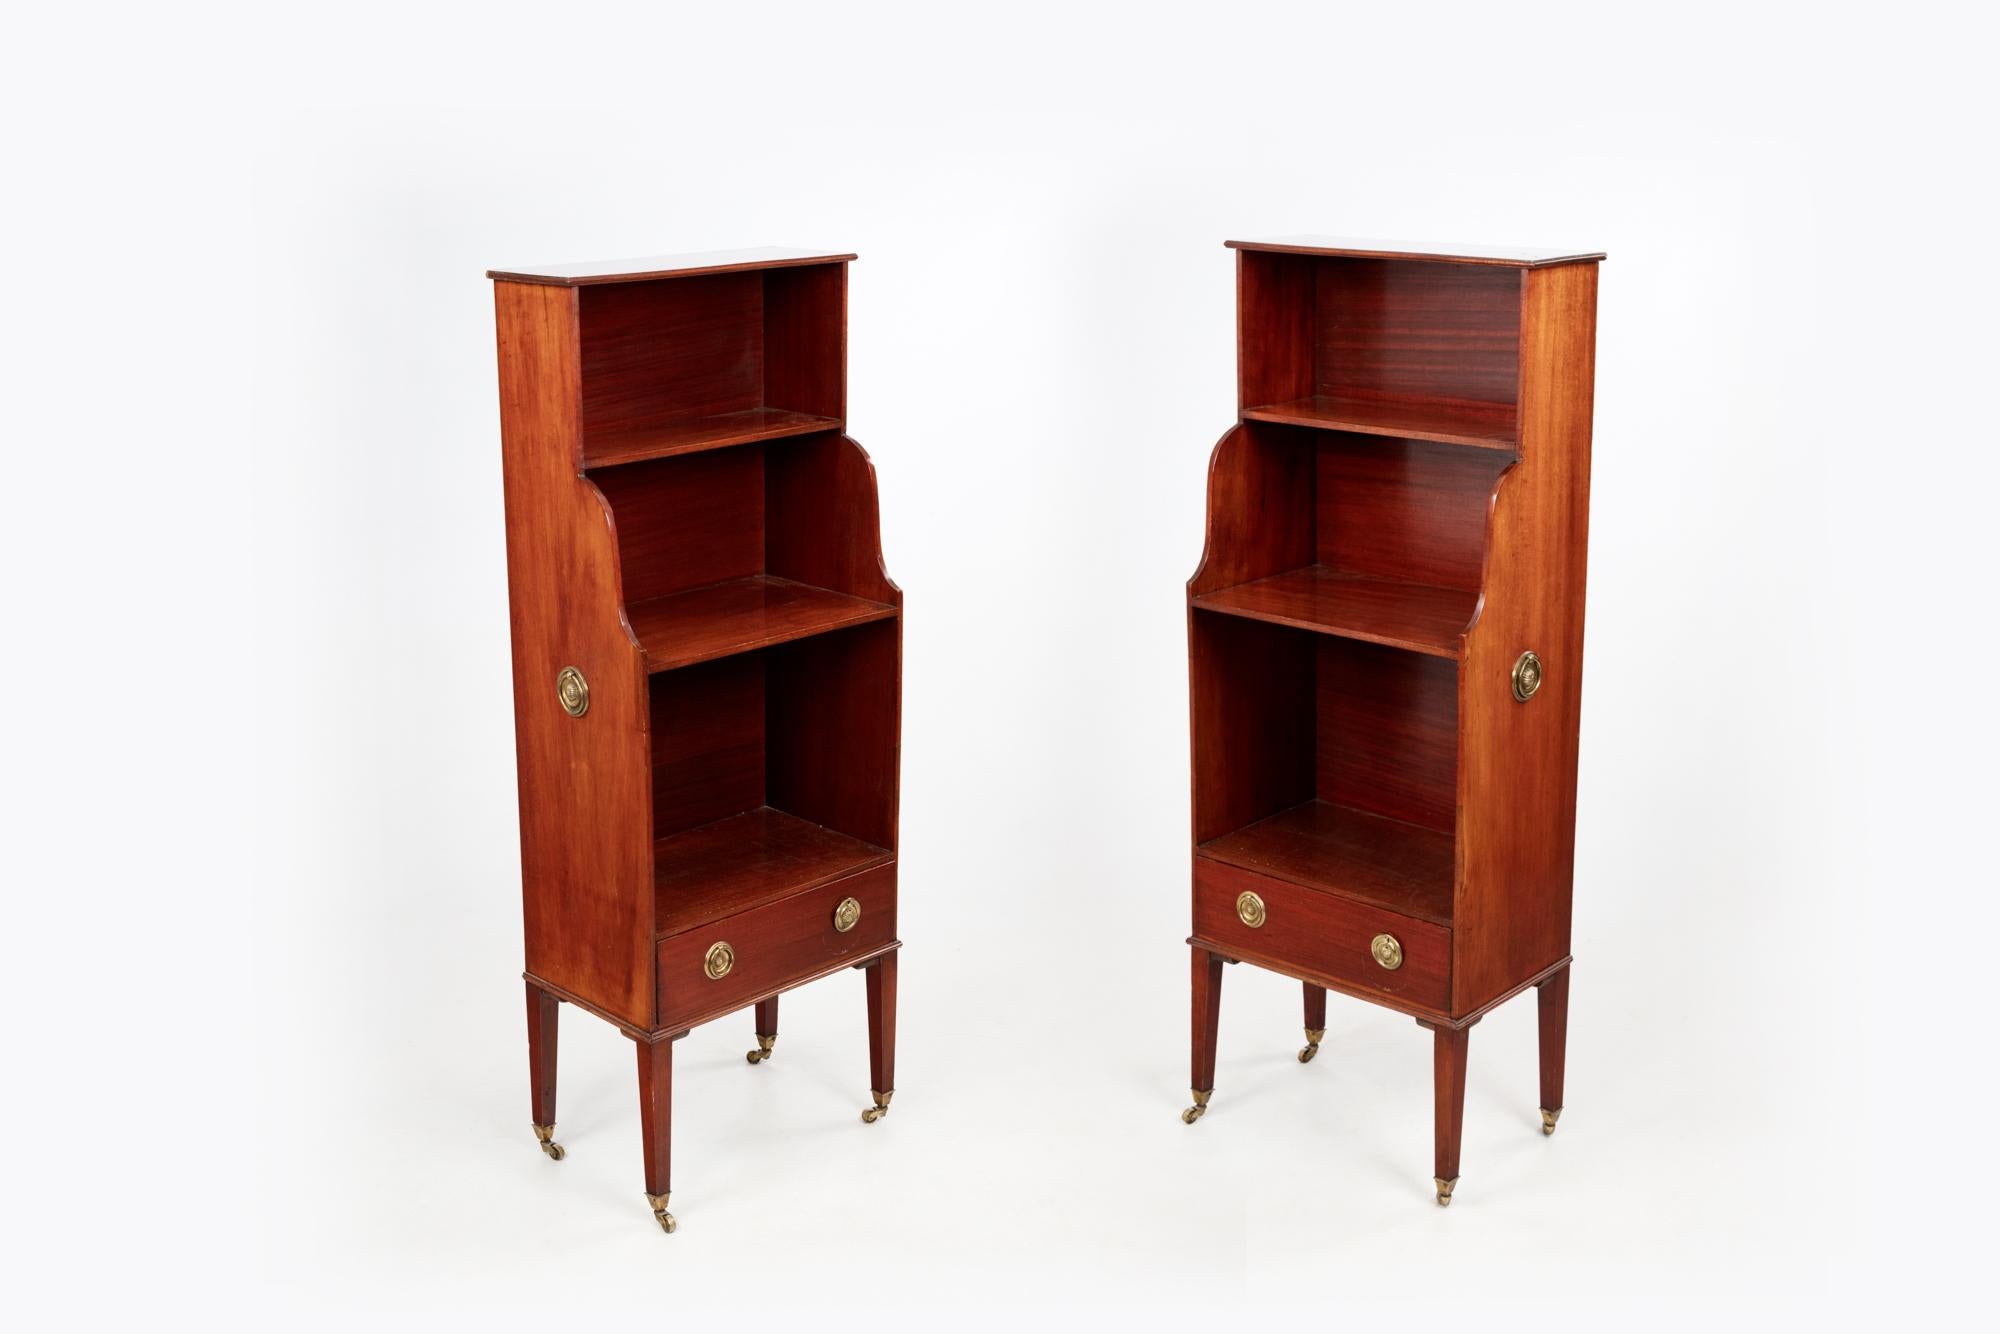 Irish Pair of Miniature Waterfall Bookcases For Sale